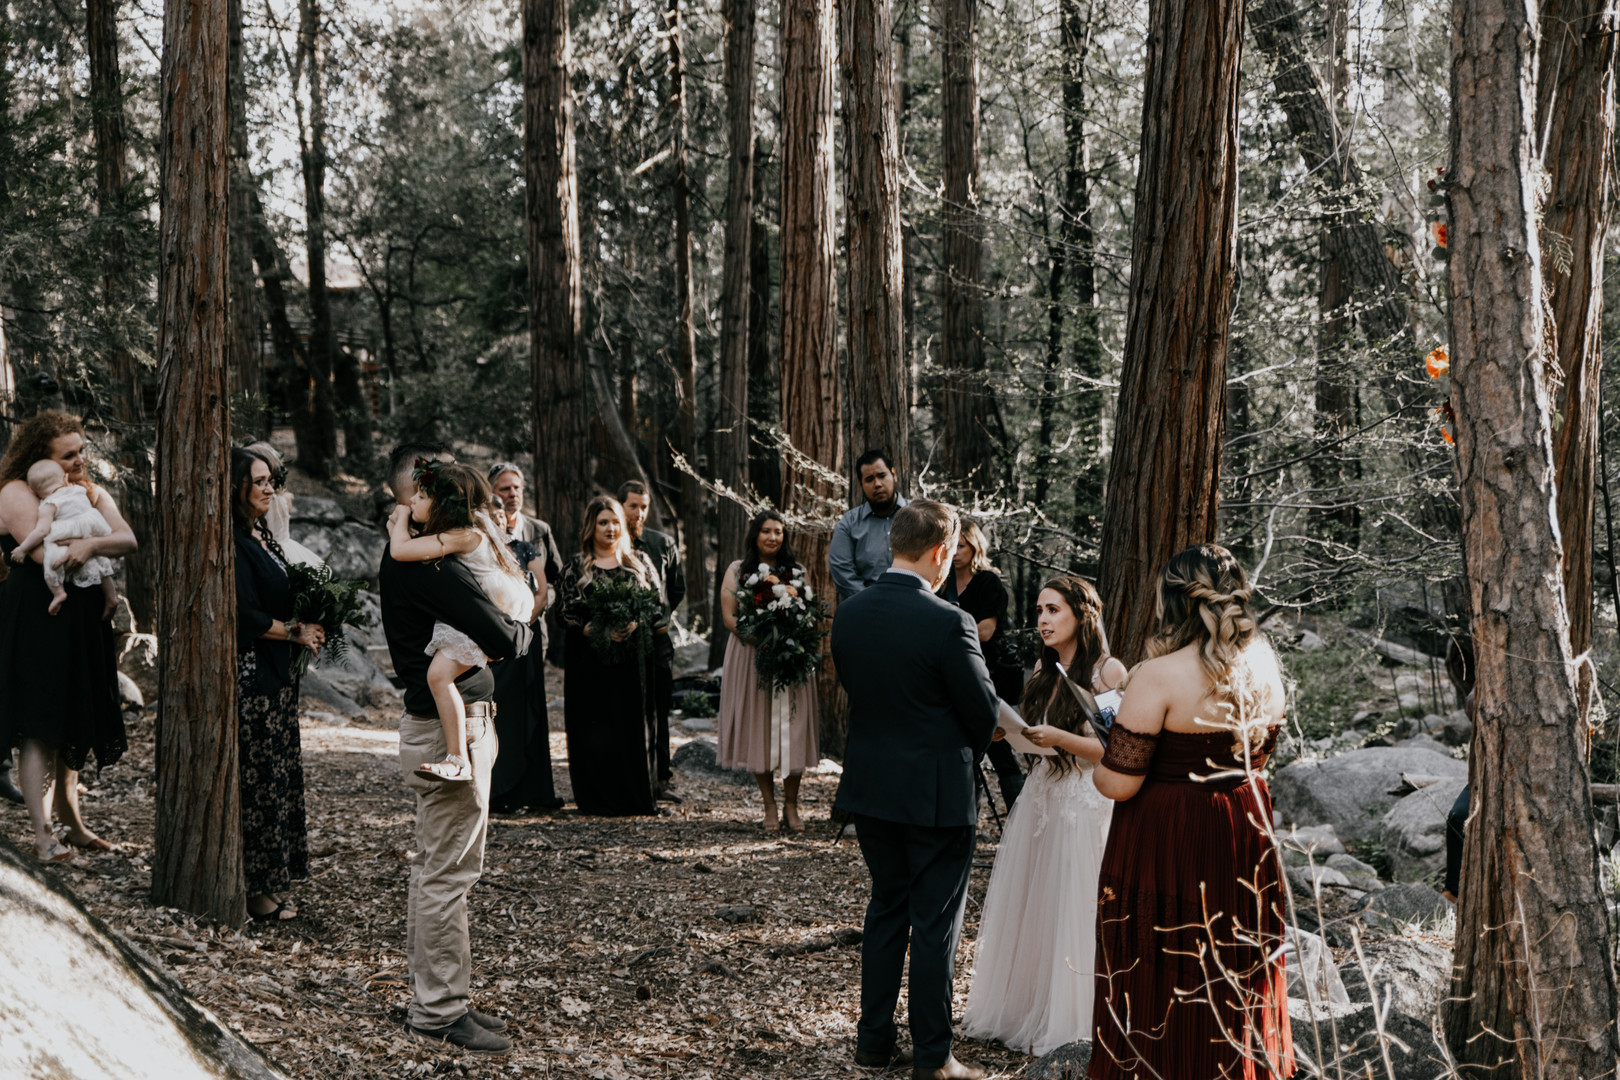 Ceremony | Intimate Rustic Forest Wedding